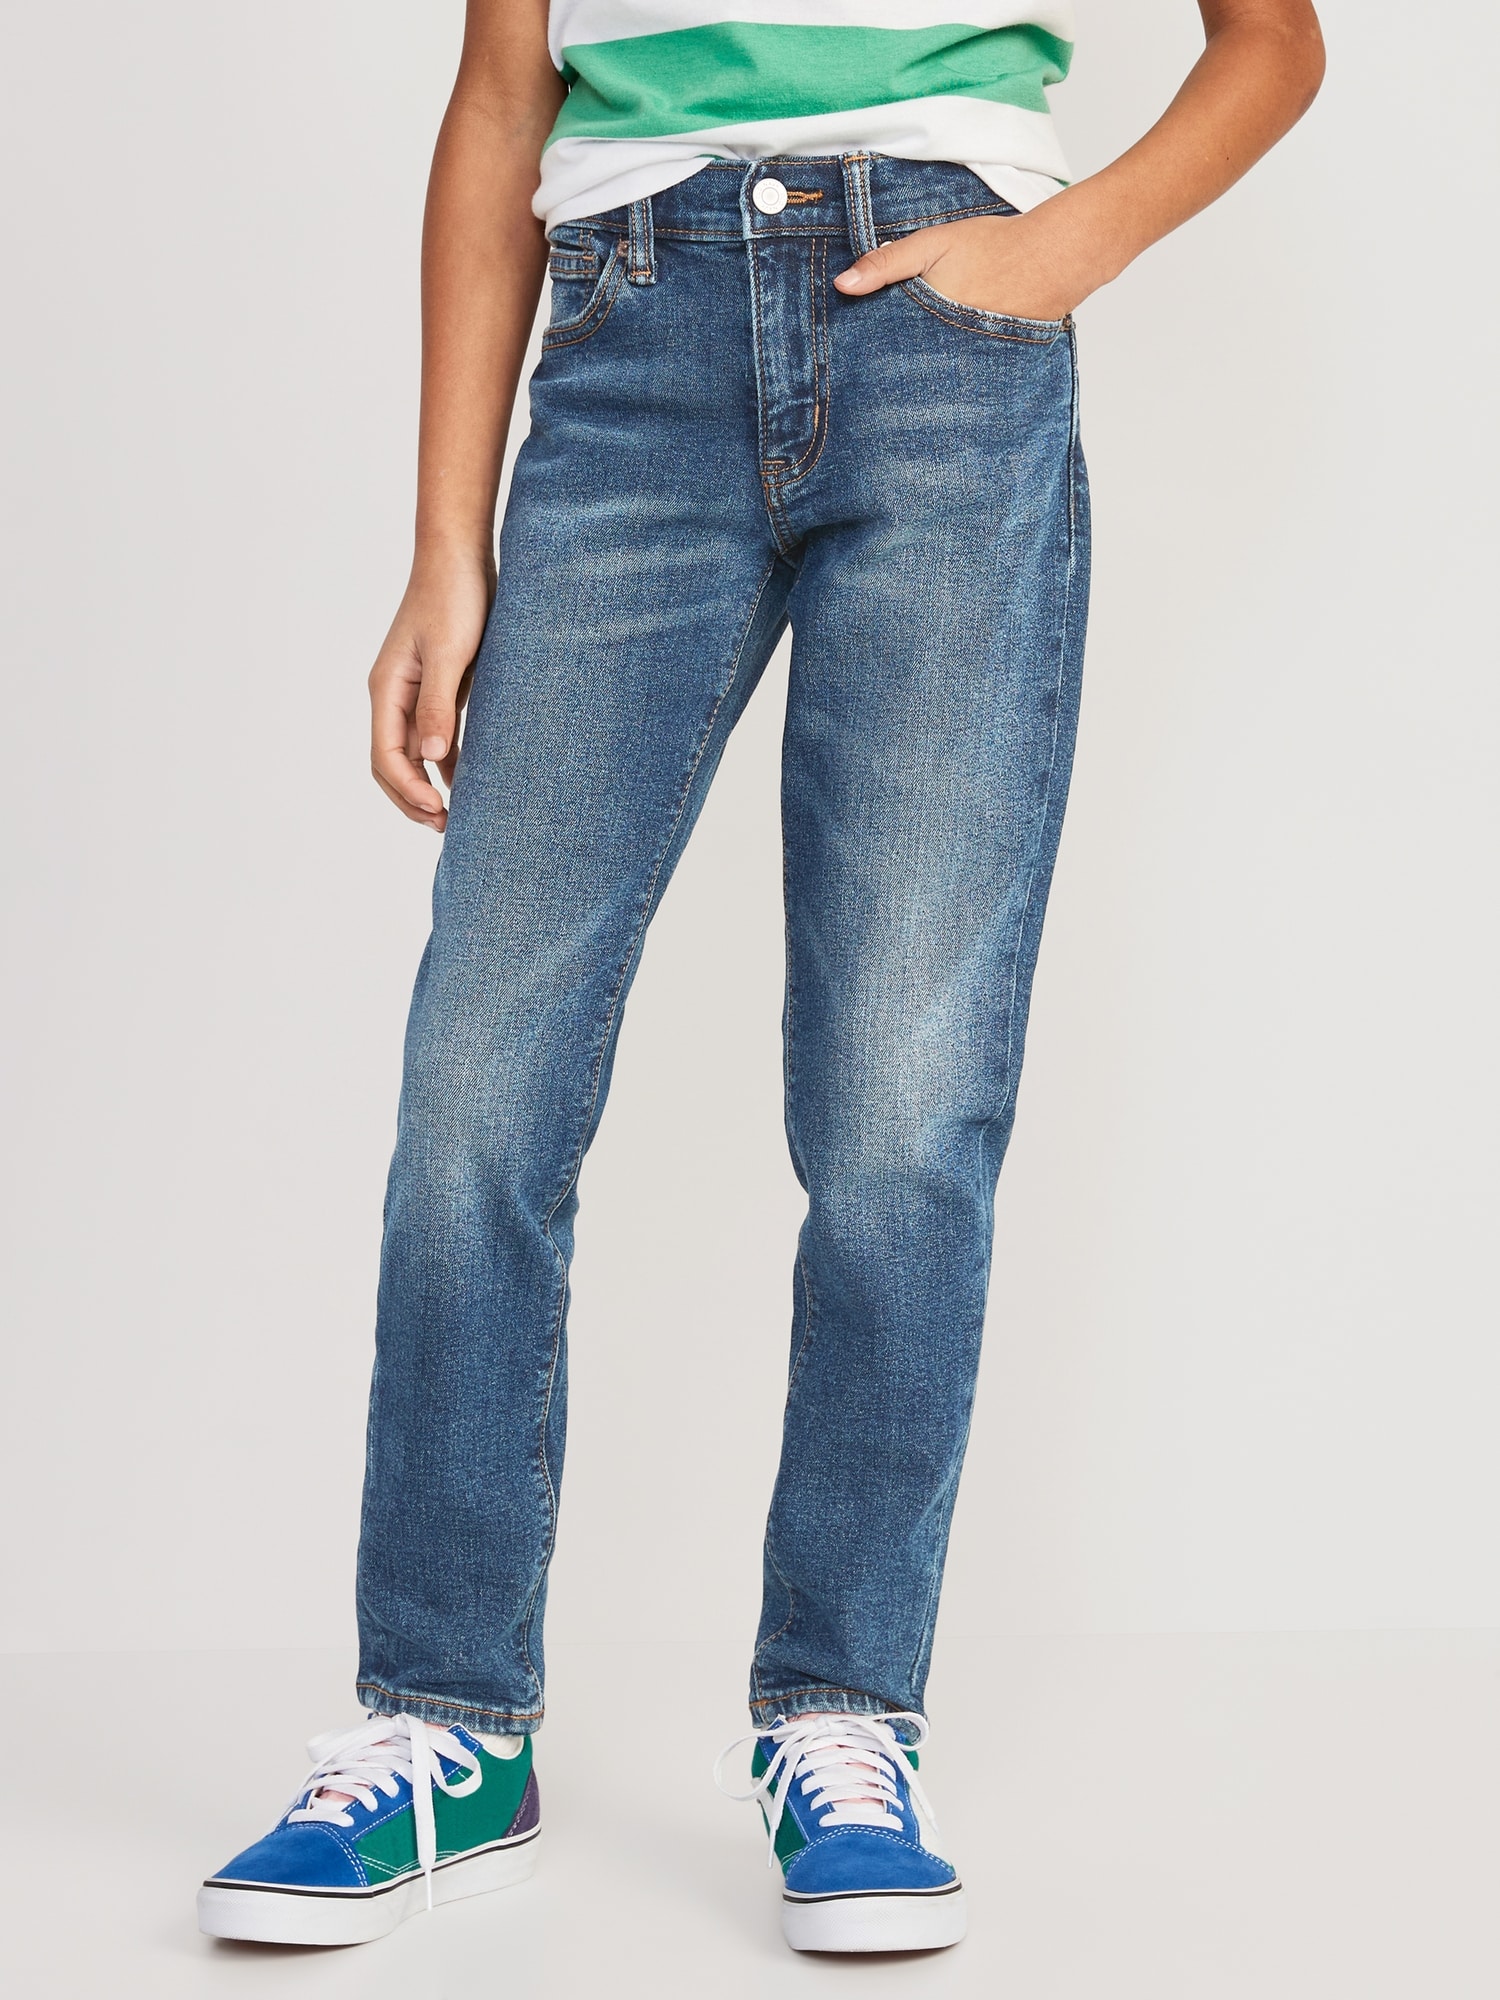 Kids Tapered | Old Navy Jeans